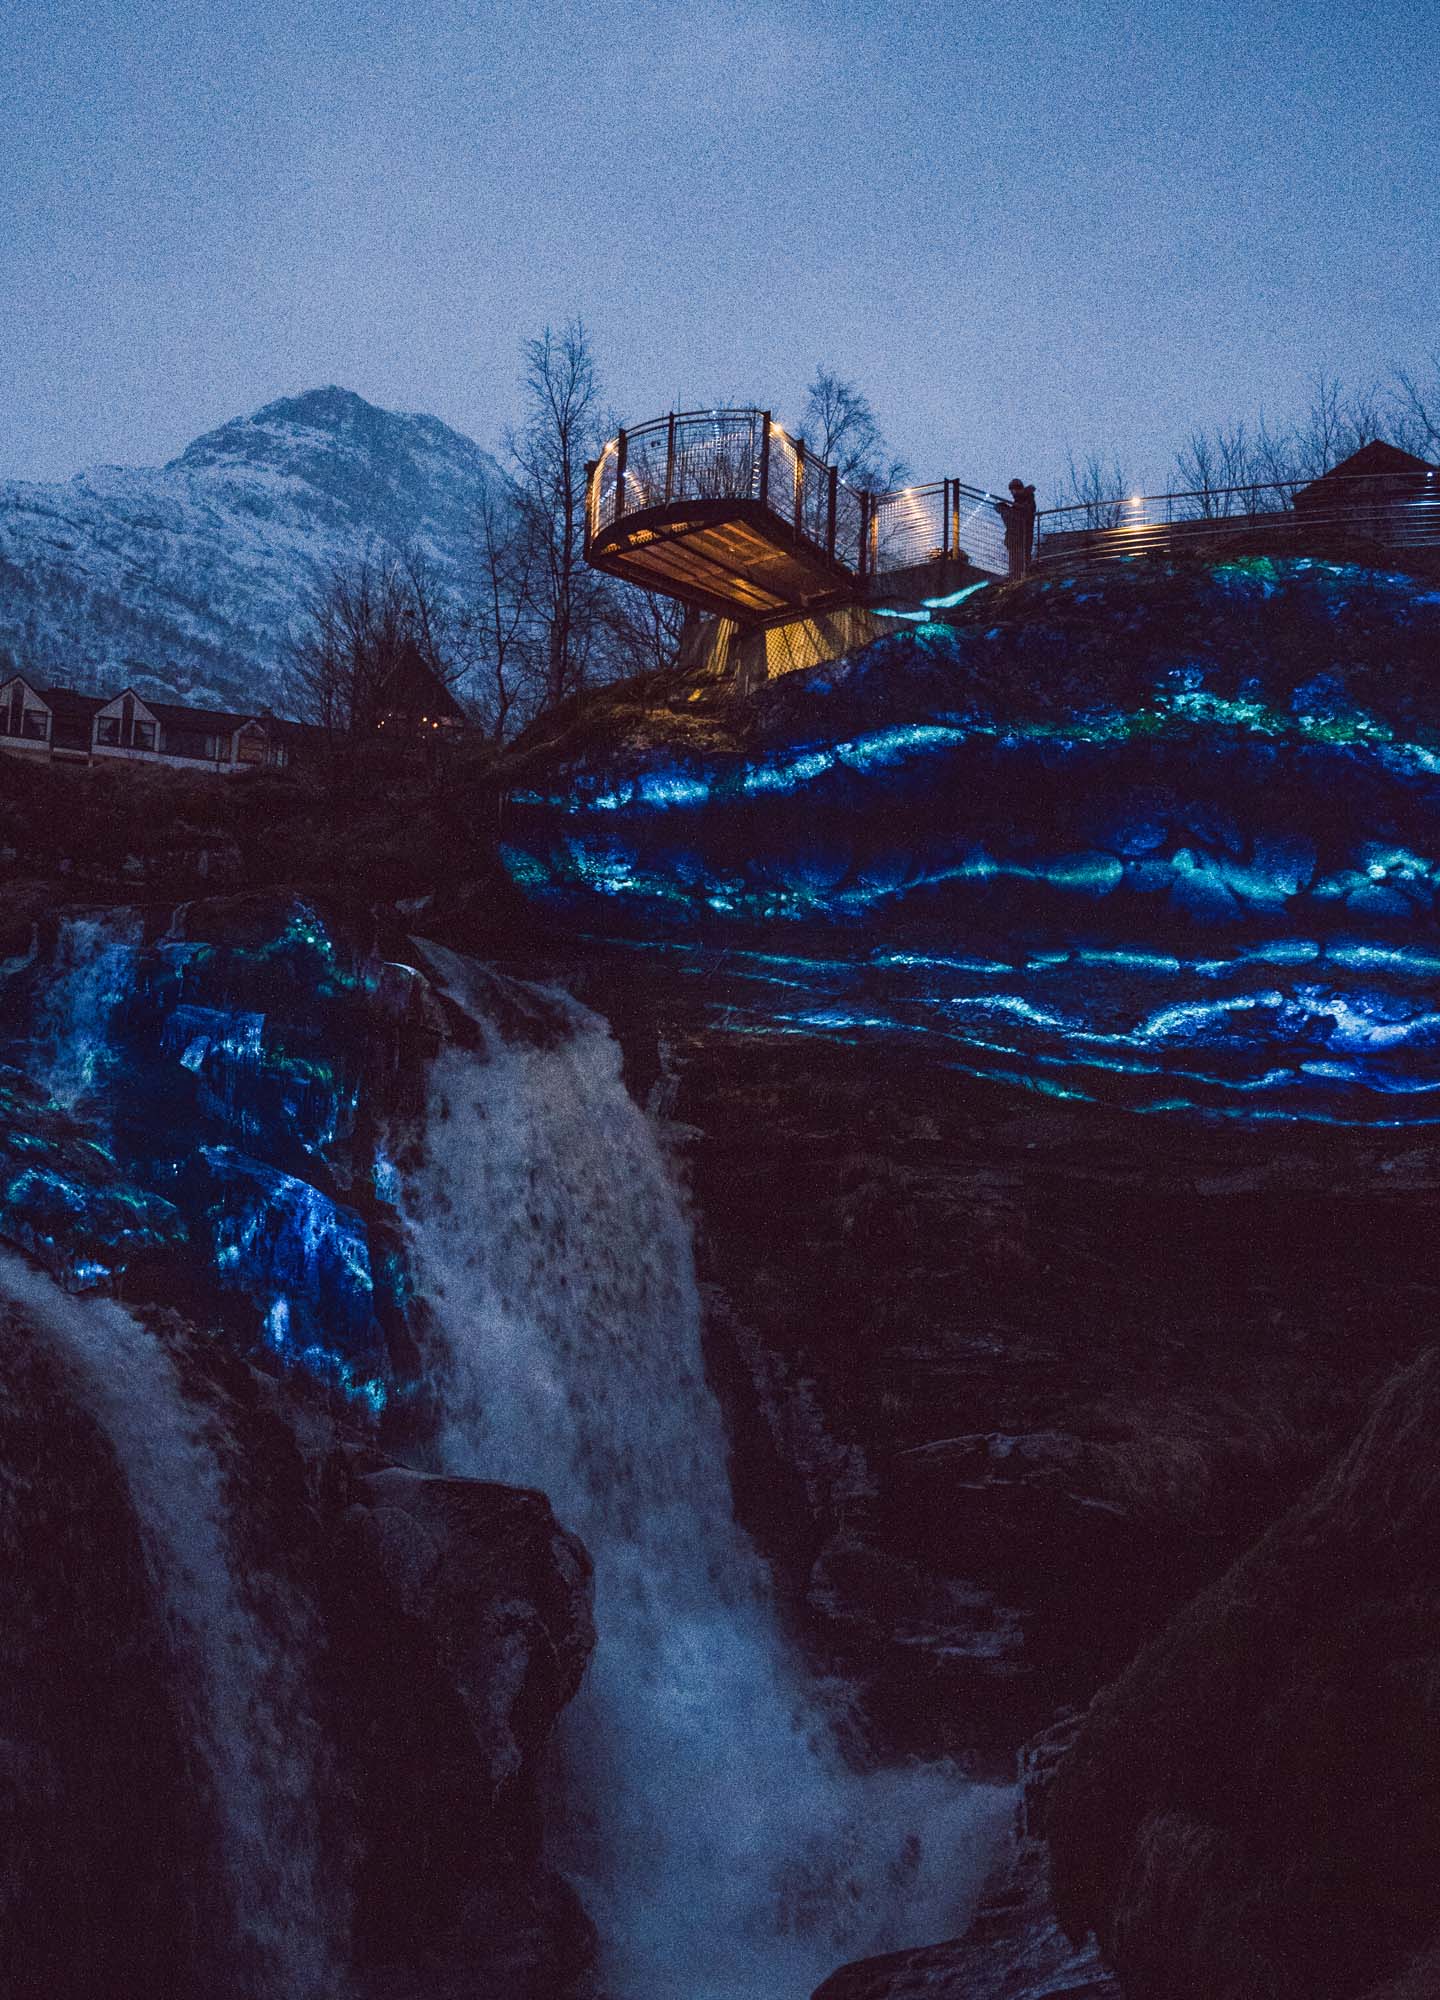 A video mapping show with blue color projected onto rocks